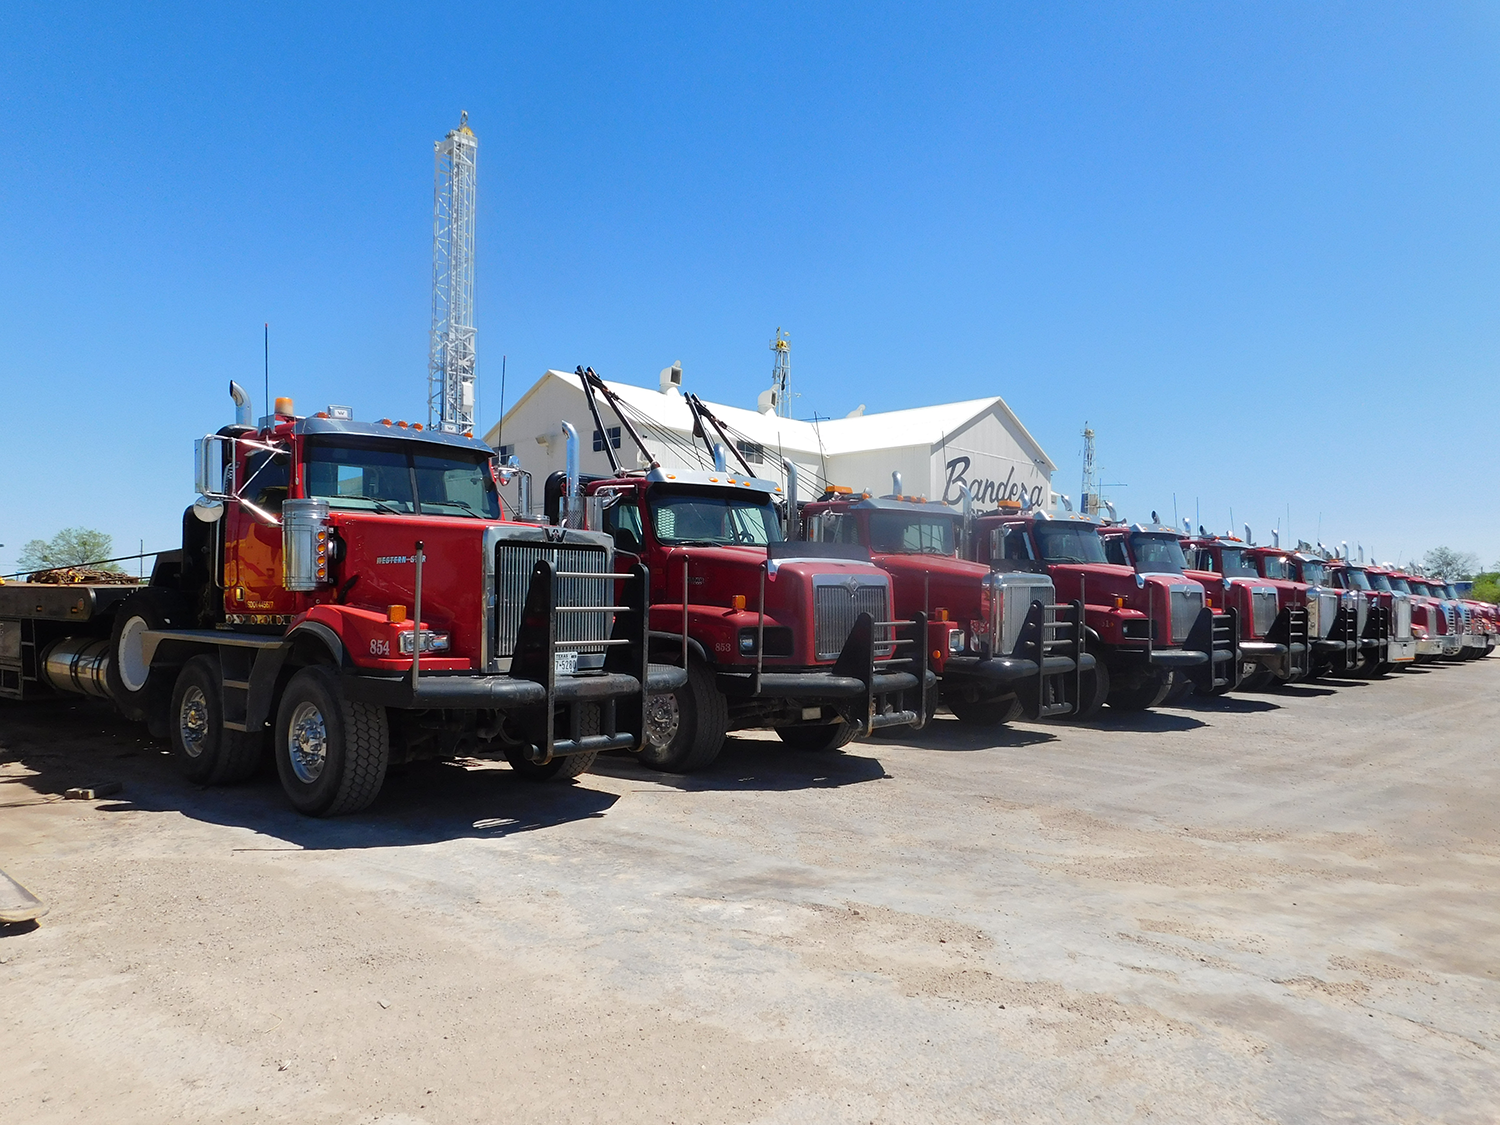 Flatbed trucks like these can haul many kinds of equipment, which makes them easier to auction outside of the the oil industry when times are hard.